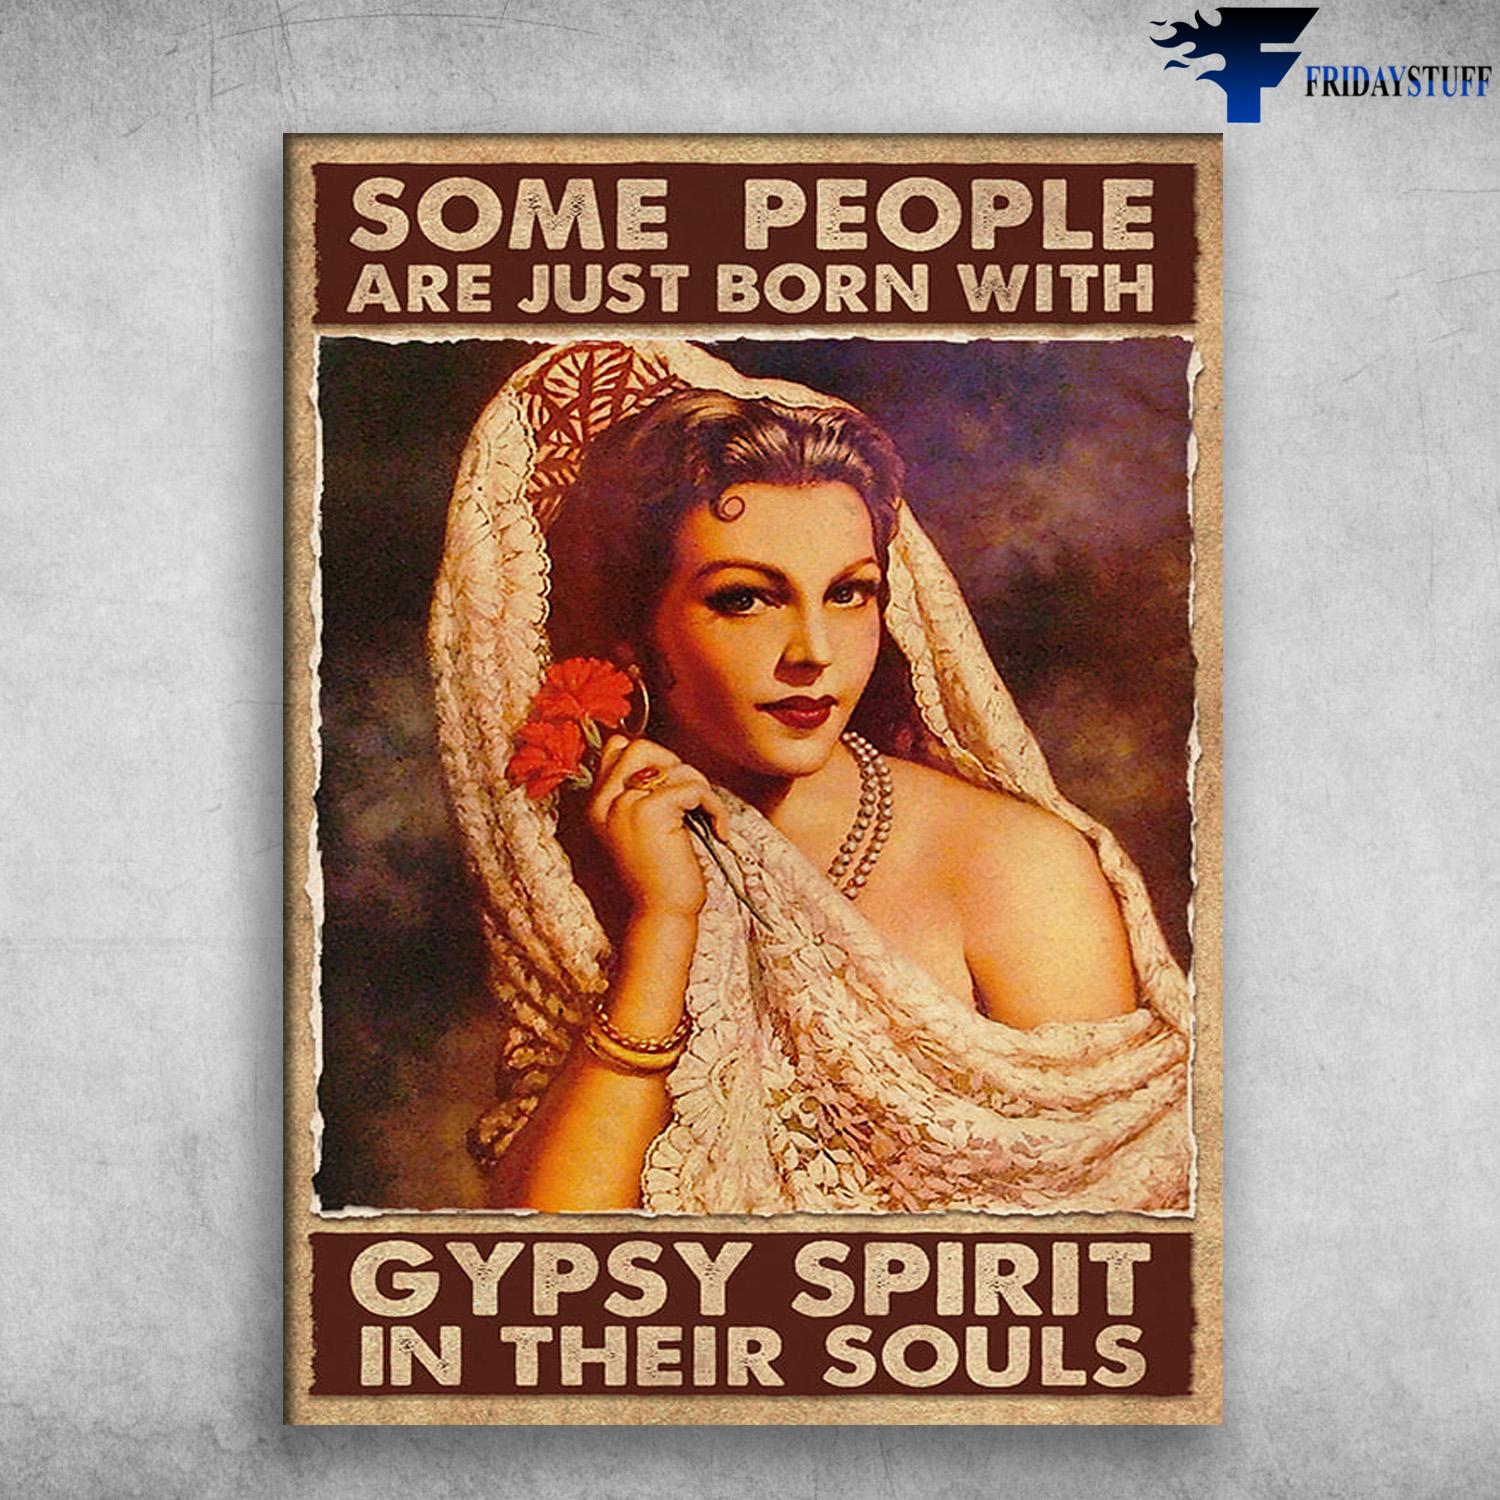 Beautiful Girl, Some People Are Just Born, With Gypsy Spirit, In Their Souls